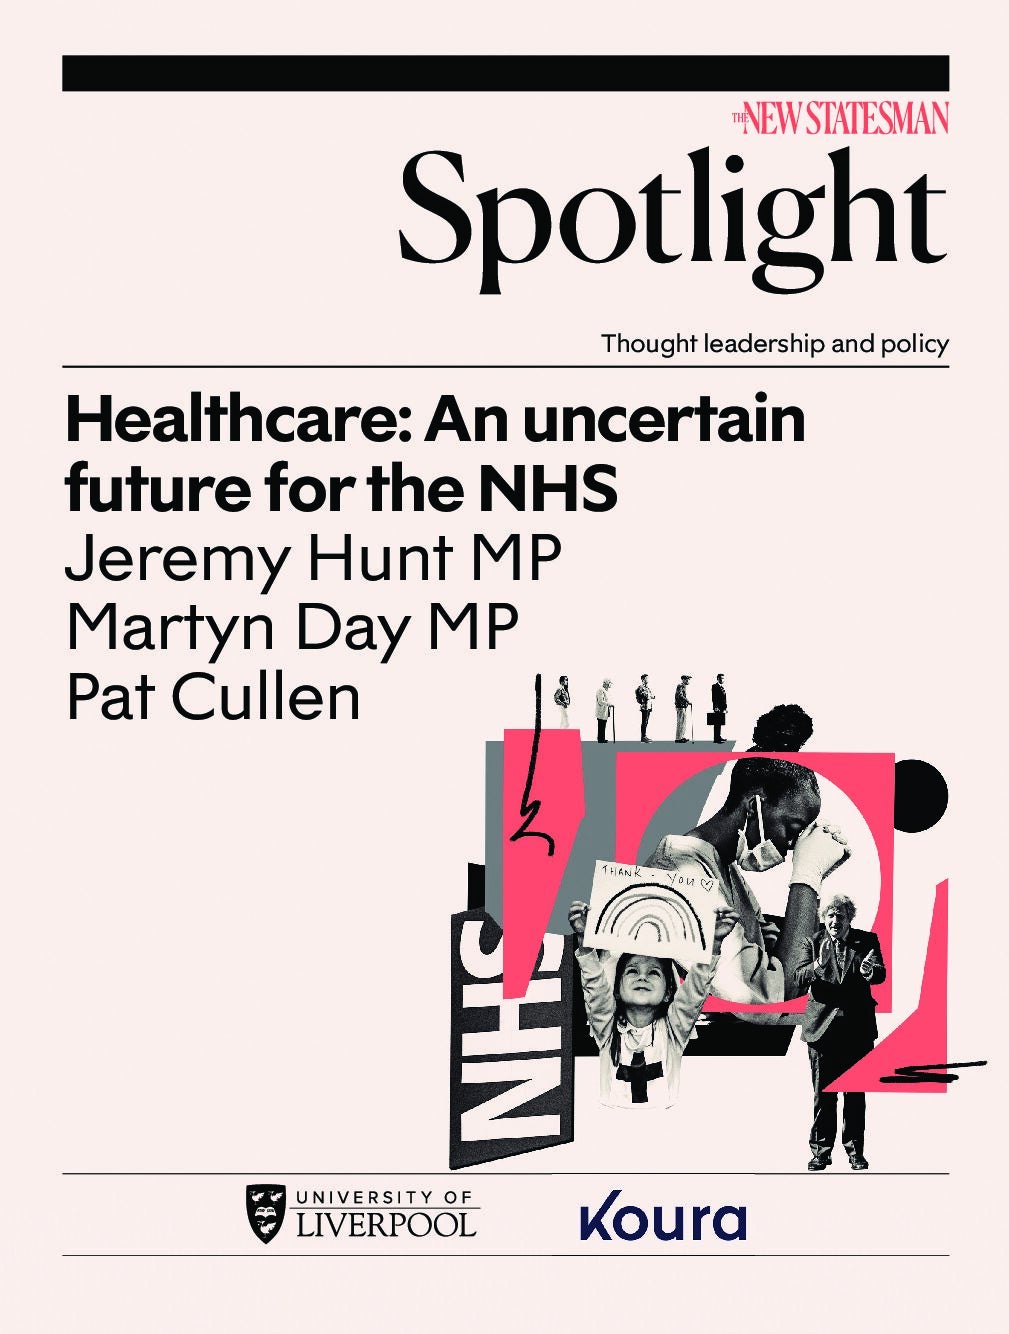 Healthcare: An uncertain future for the NHS